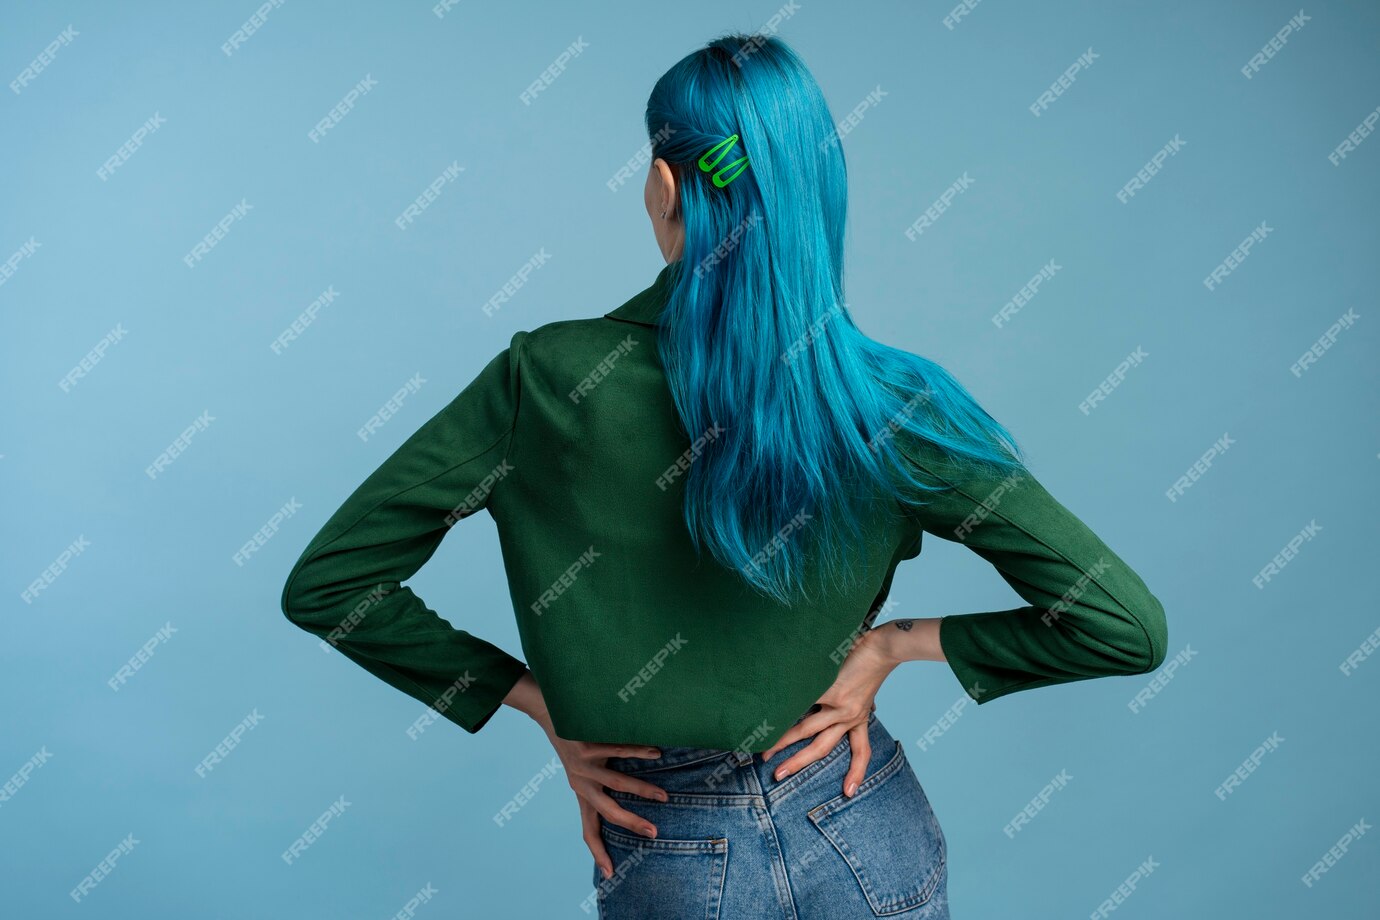 2. "Stunning blue hair and back tattoo ideas for women" - wide 9